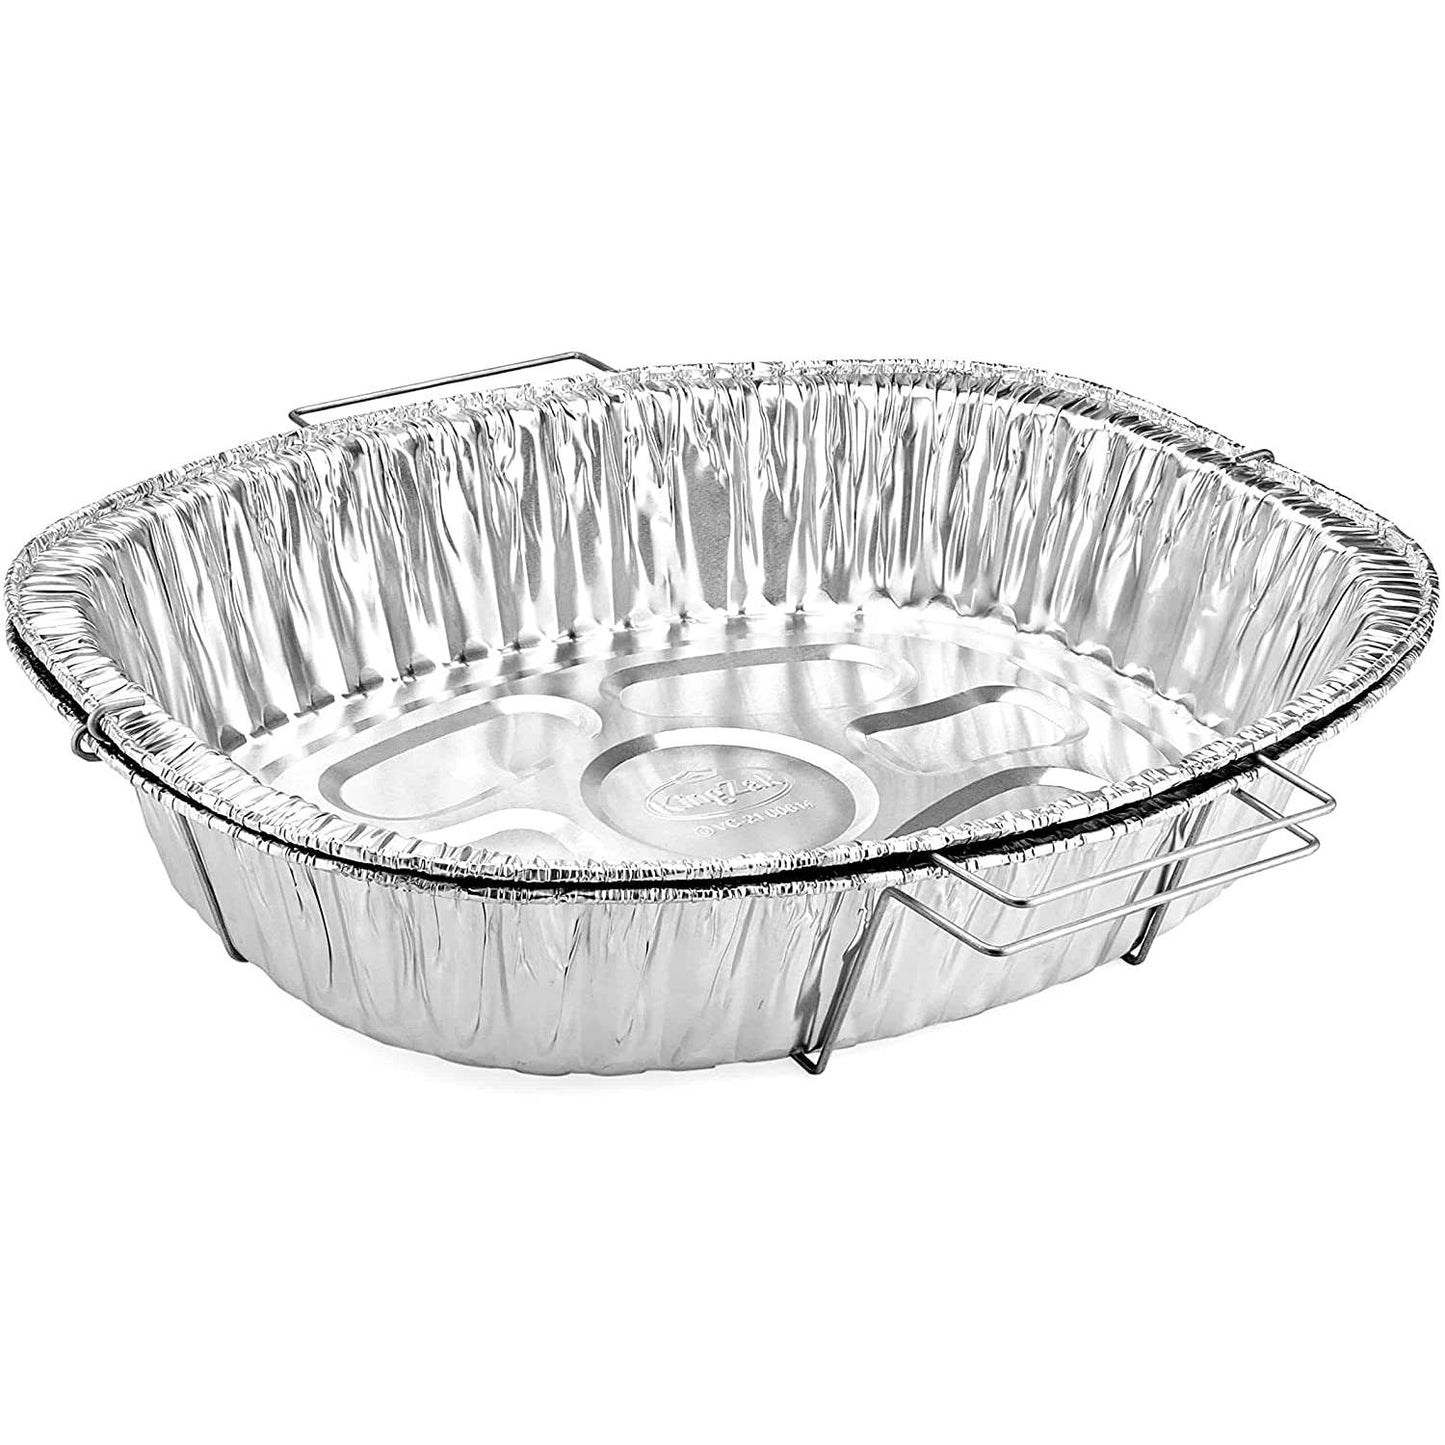 Nicole Home Collection 00614 Aluminum Oval Rack Roaster Large Pack of 100